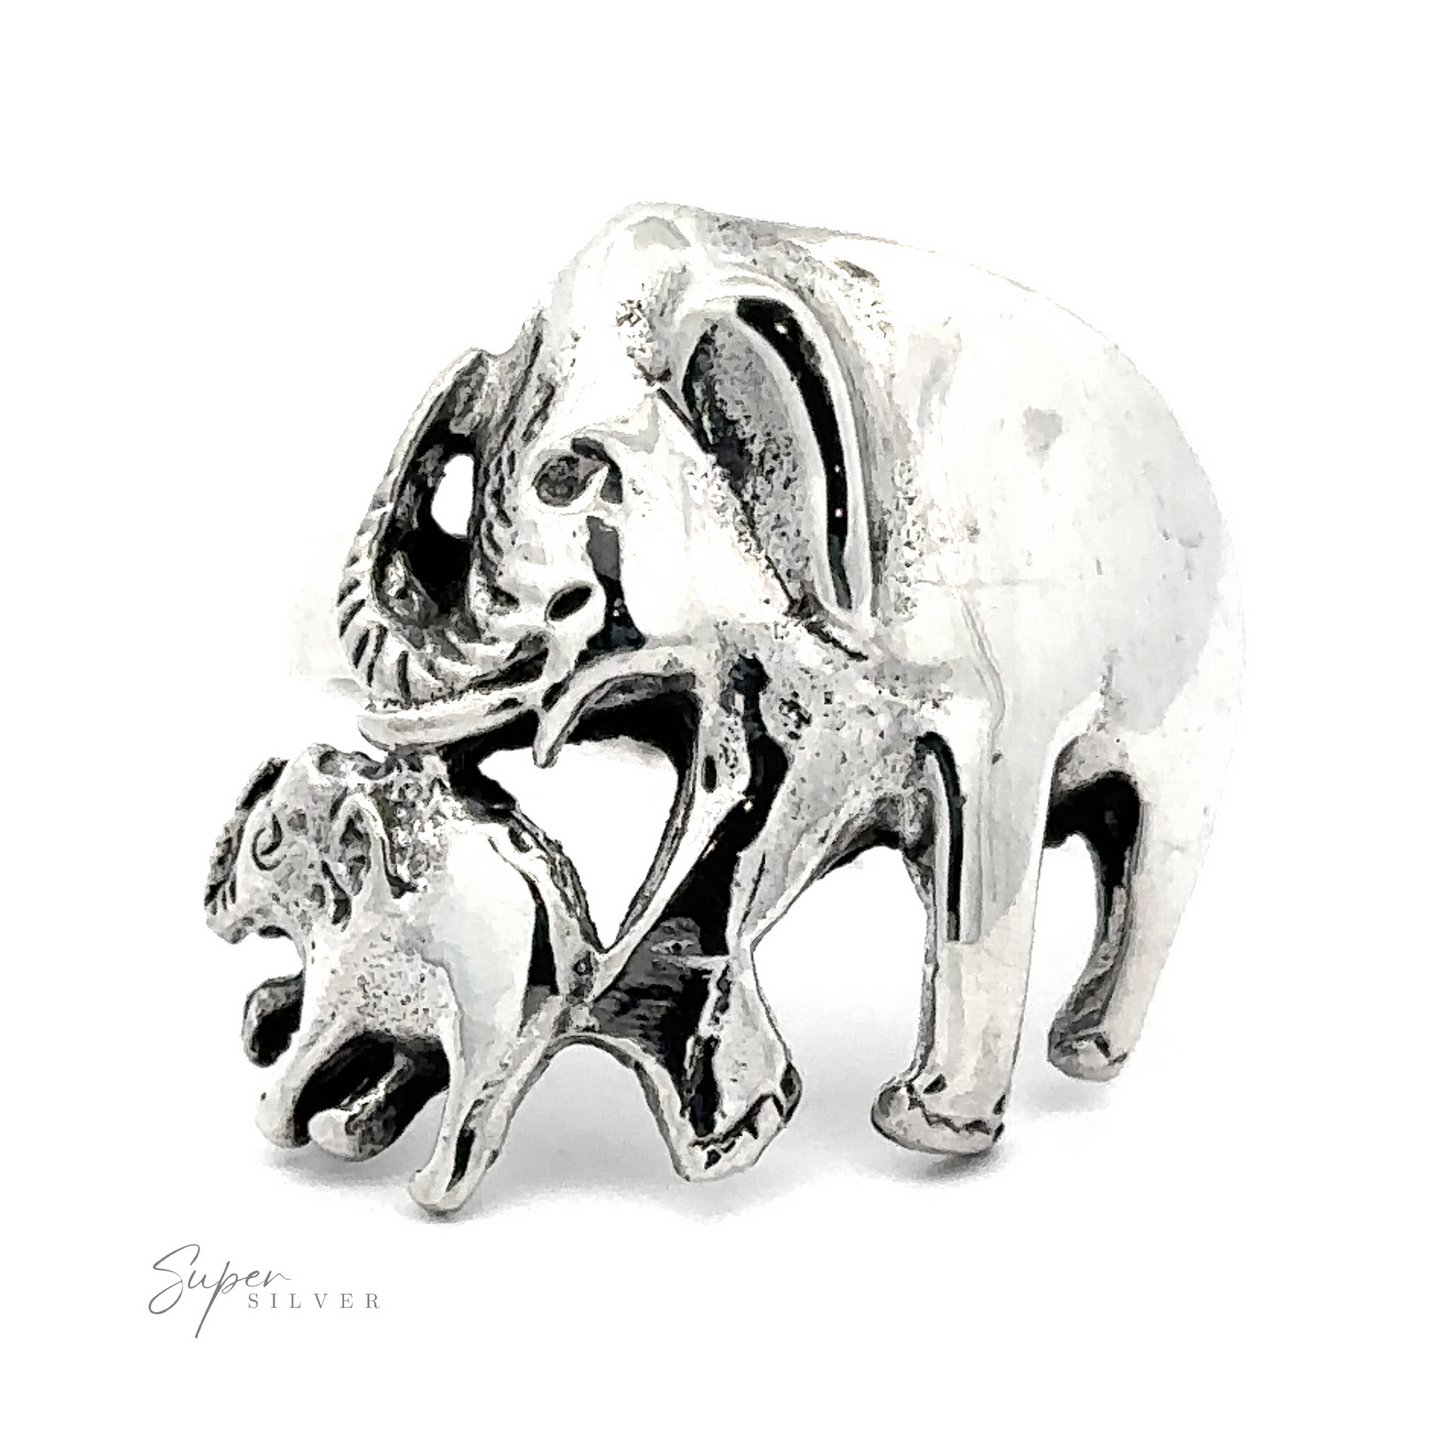 An intricately designed Silver Elephant and Calf Ring sculpture with a smaller elephant figure beneath it.